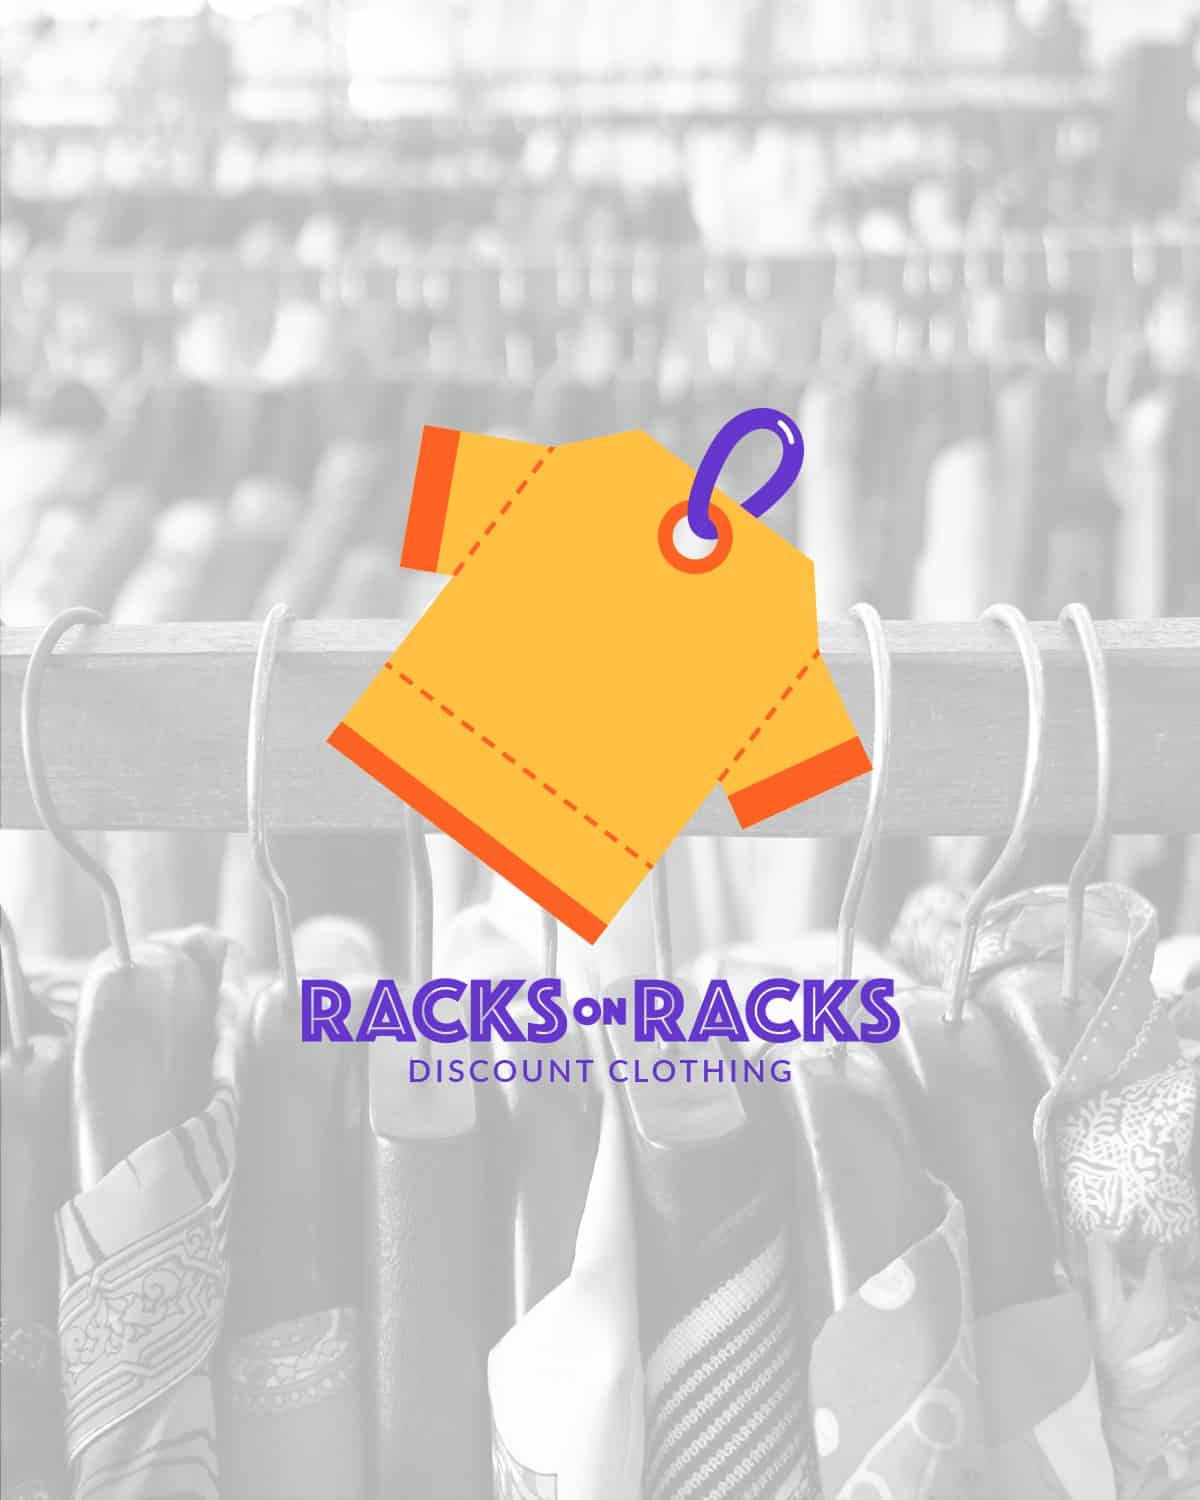 A tag in the shape of a t-shirt with the text "Racks on Racks Discount Clothing" appear on top of a photograph of clothing racks.